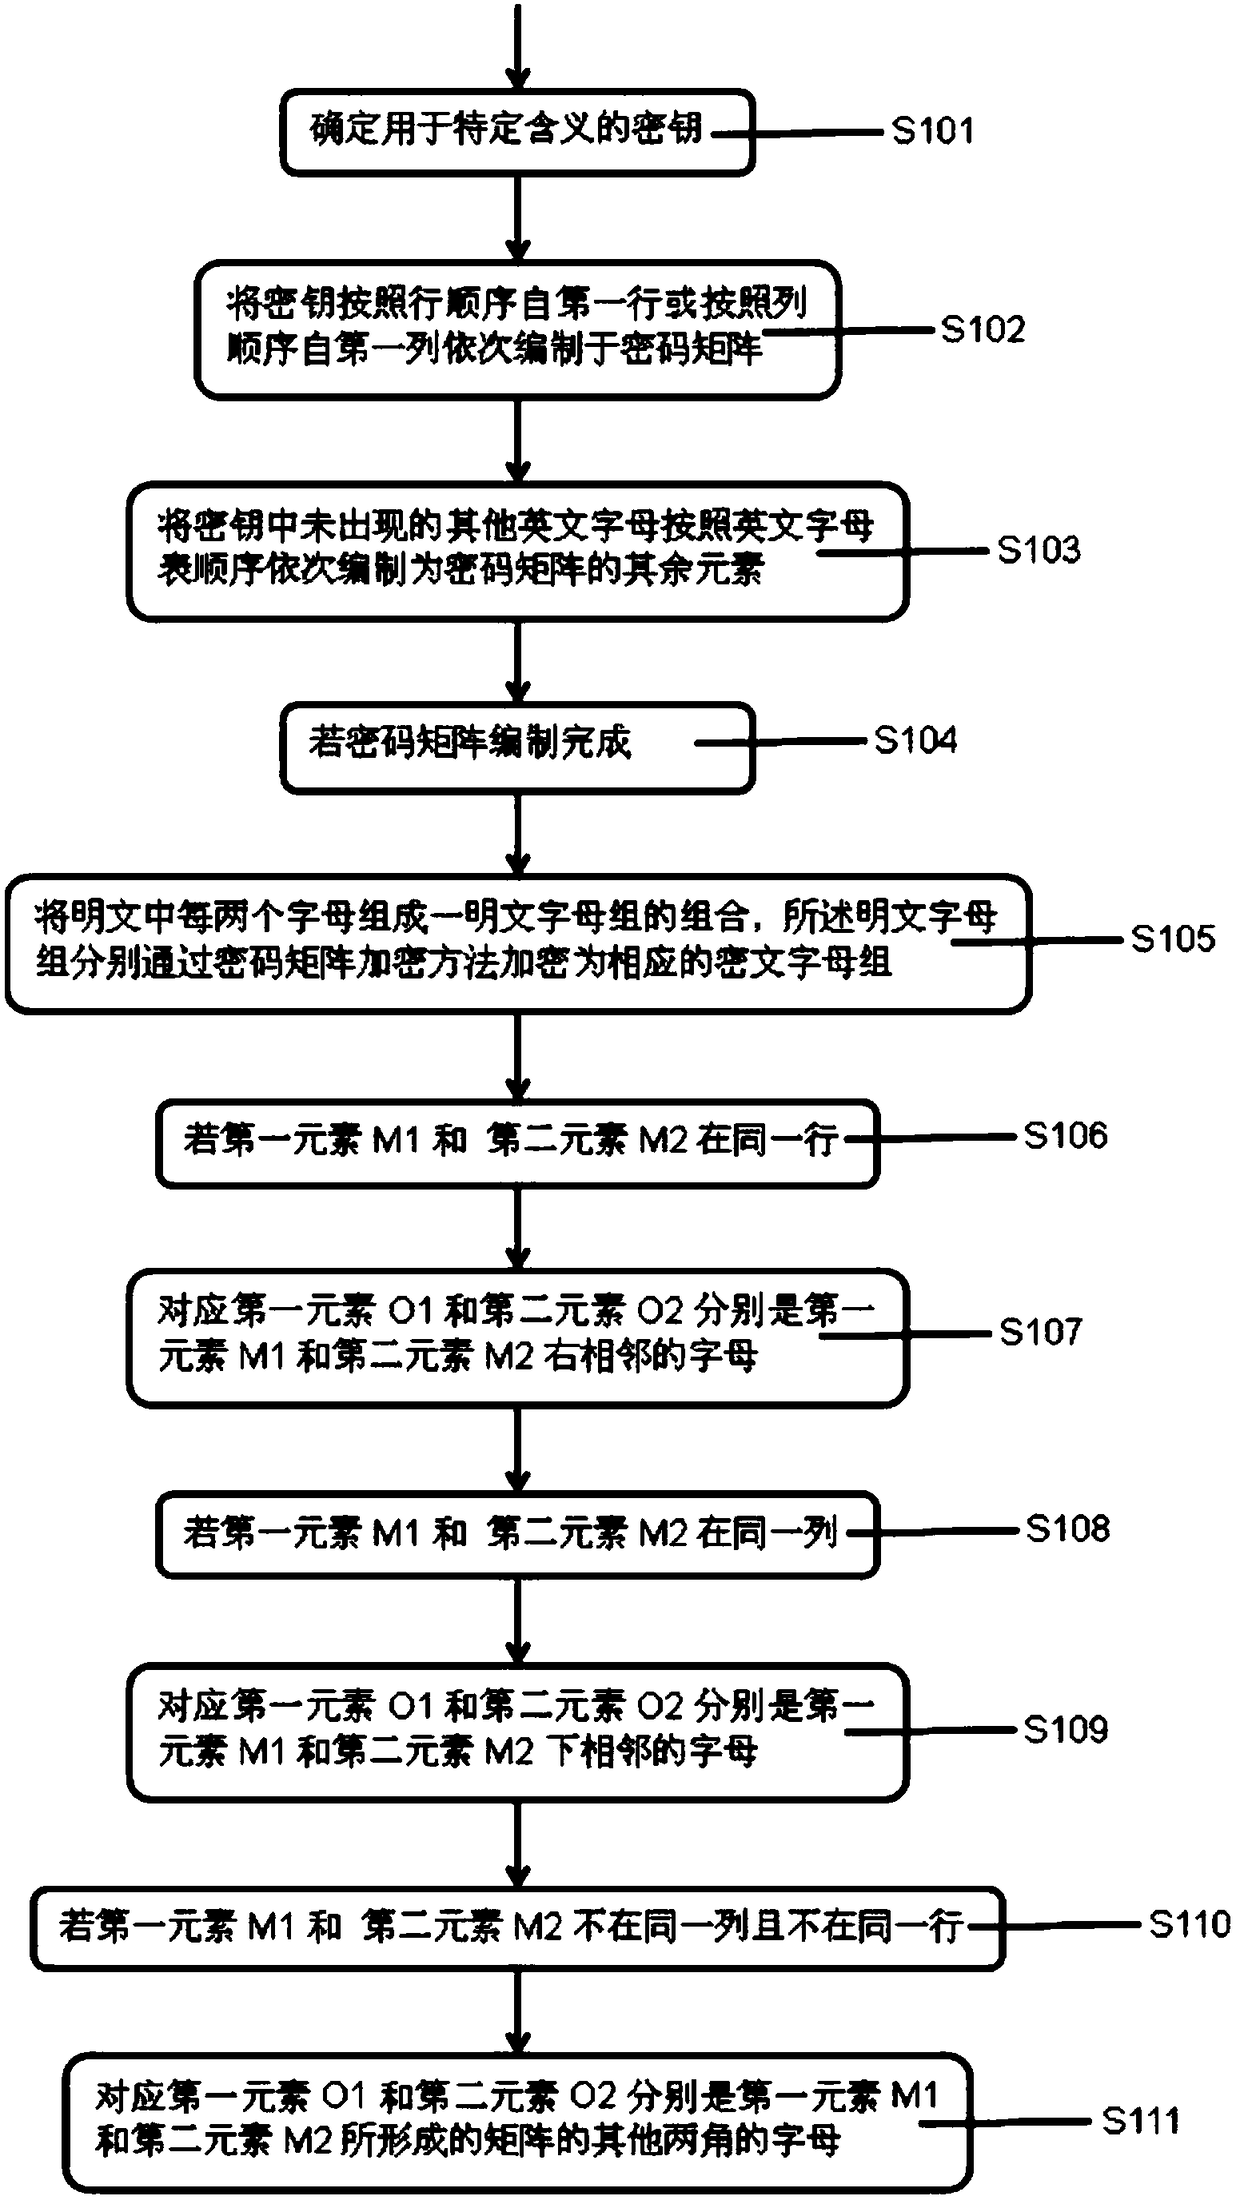 Information security management method and system for internet of things based on combinatorial encryption algorithm